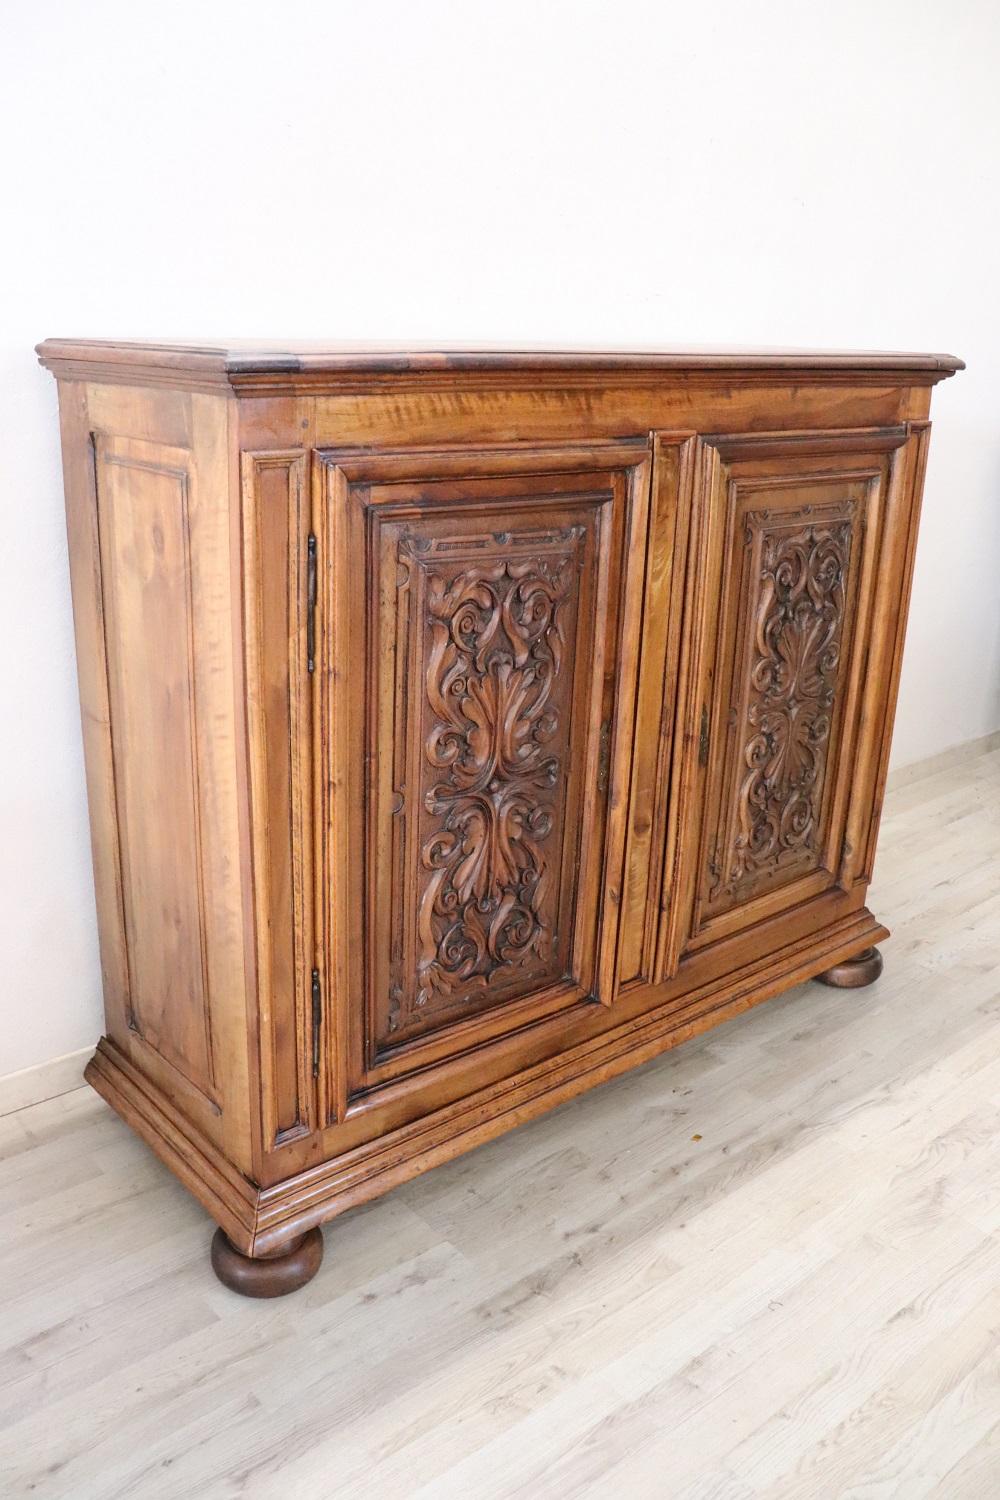 Hand-Carved 19th Century Italian Antique Sideboard or Buffet in Solid Carved Walnut For Sale